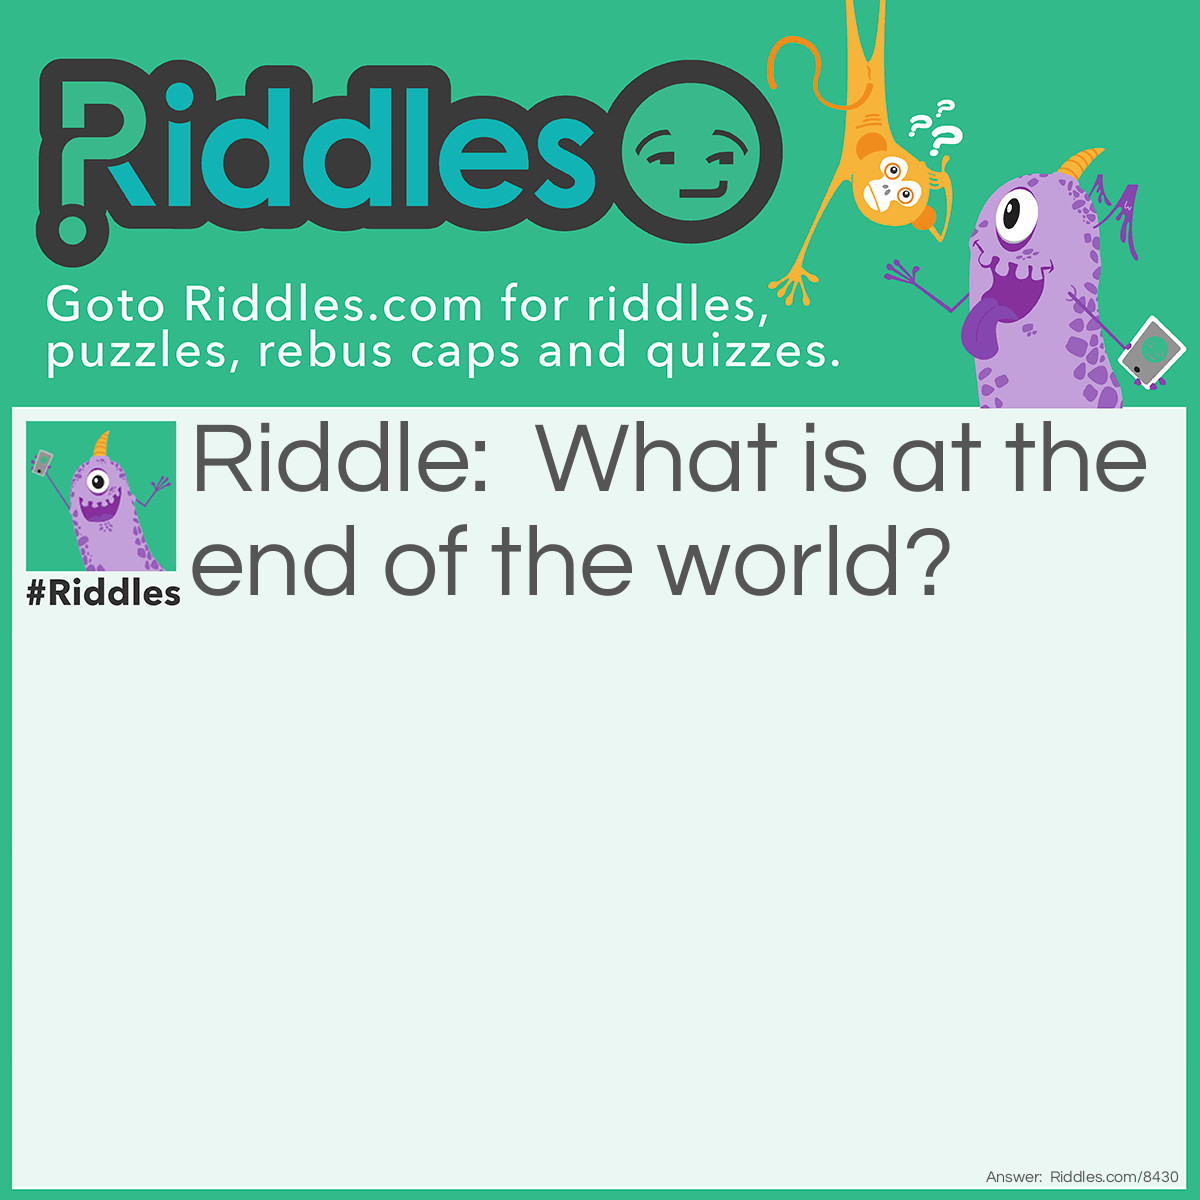 Riddle: What is at the end of the world? Answer: The letter D.